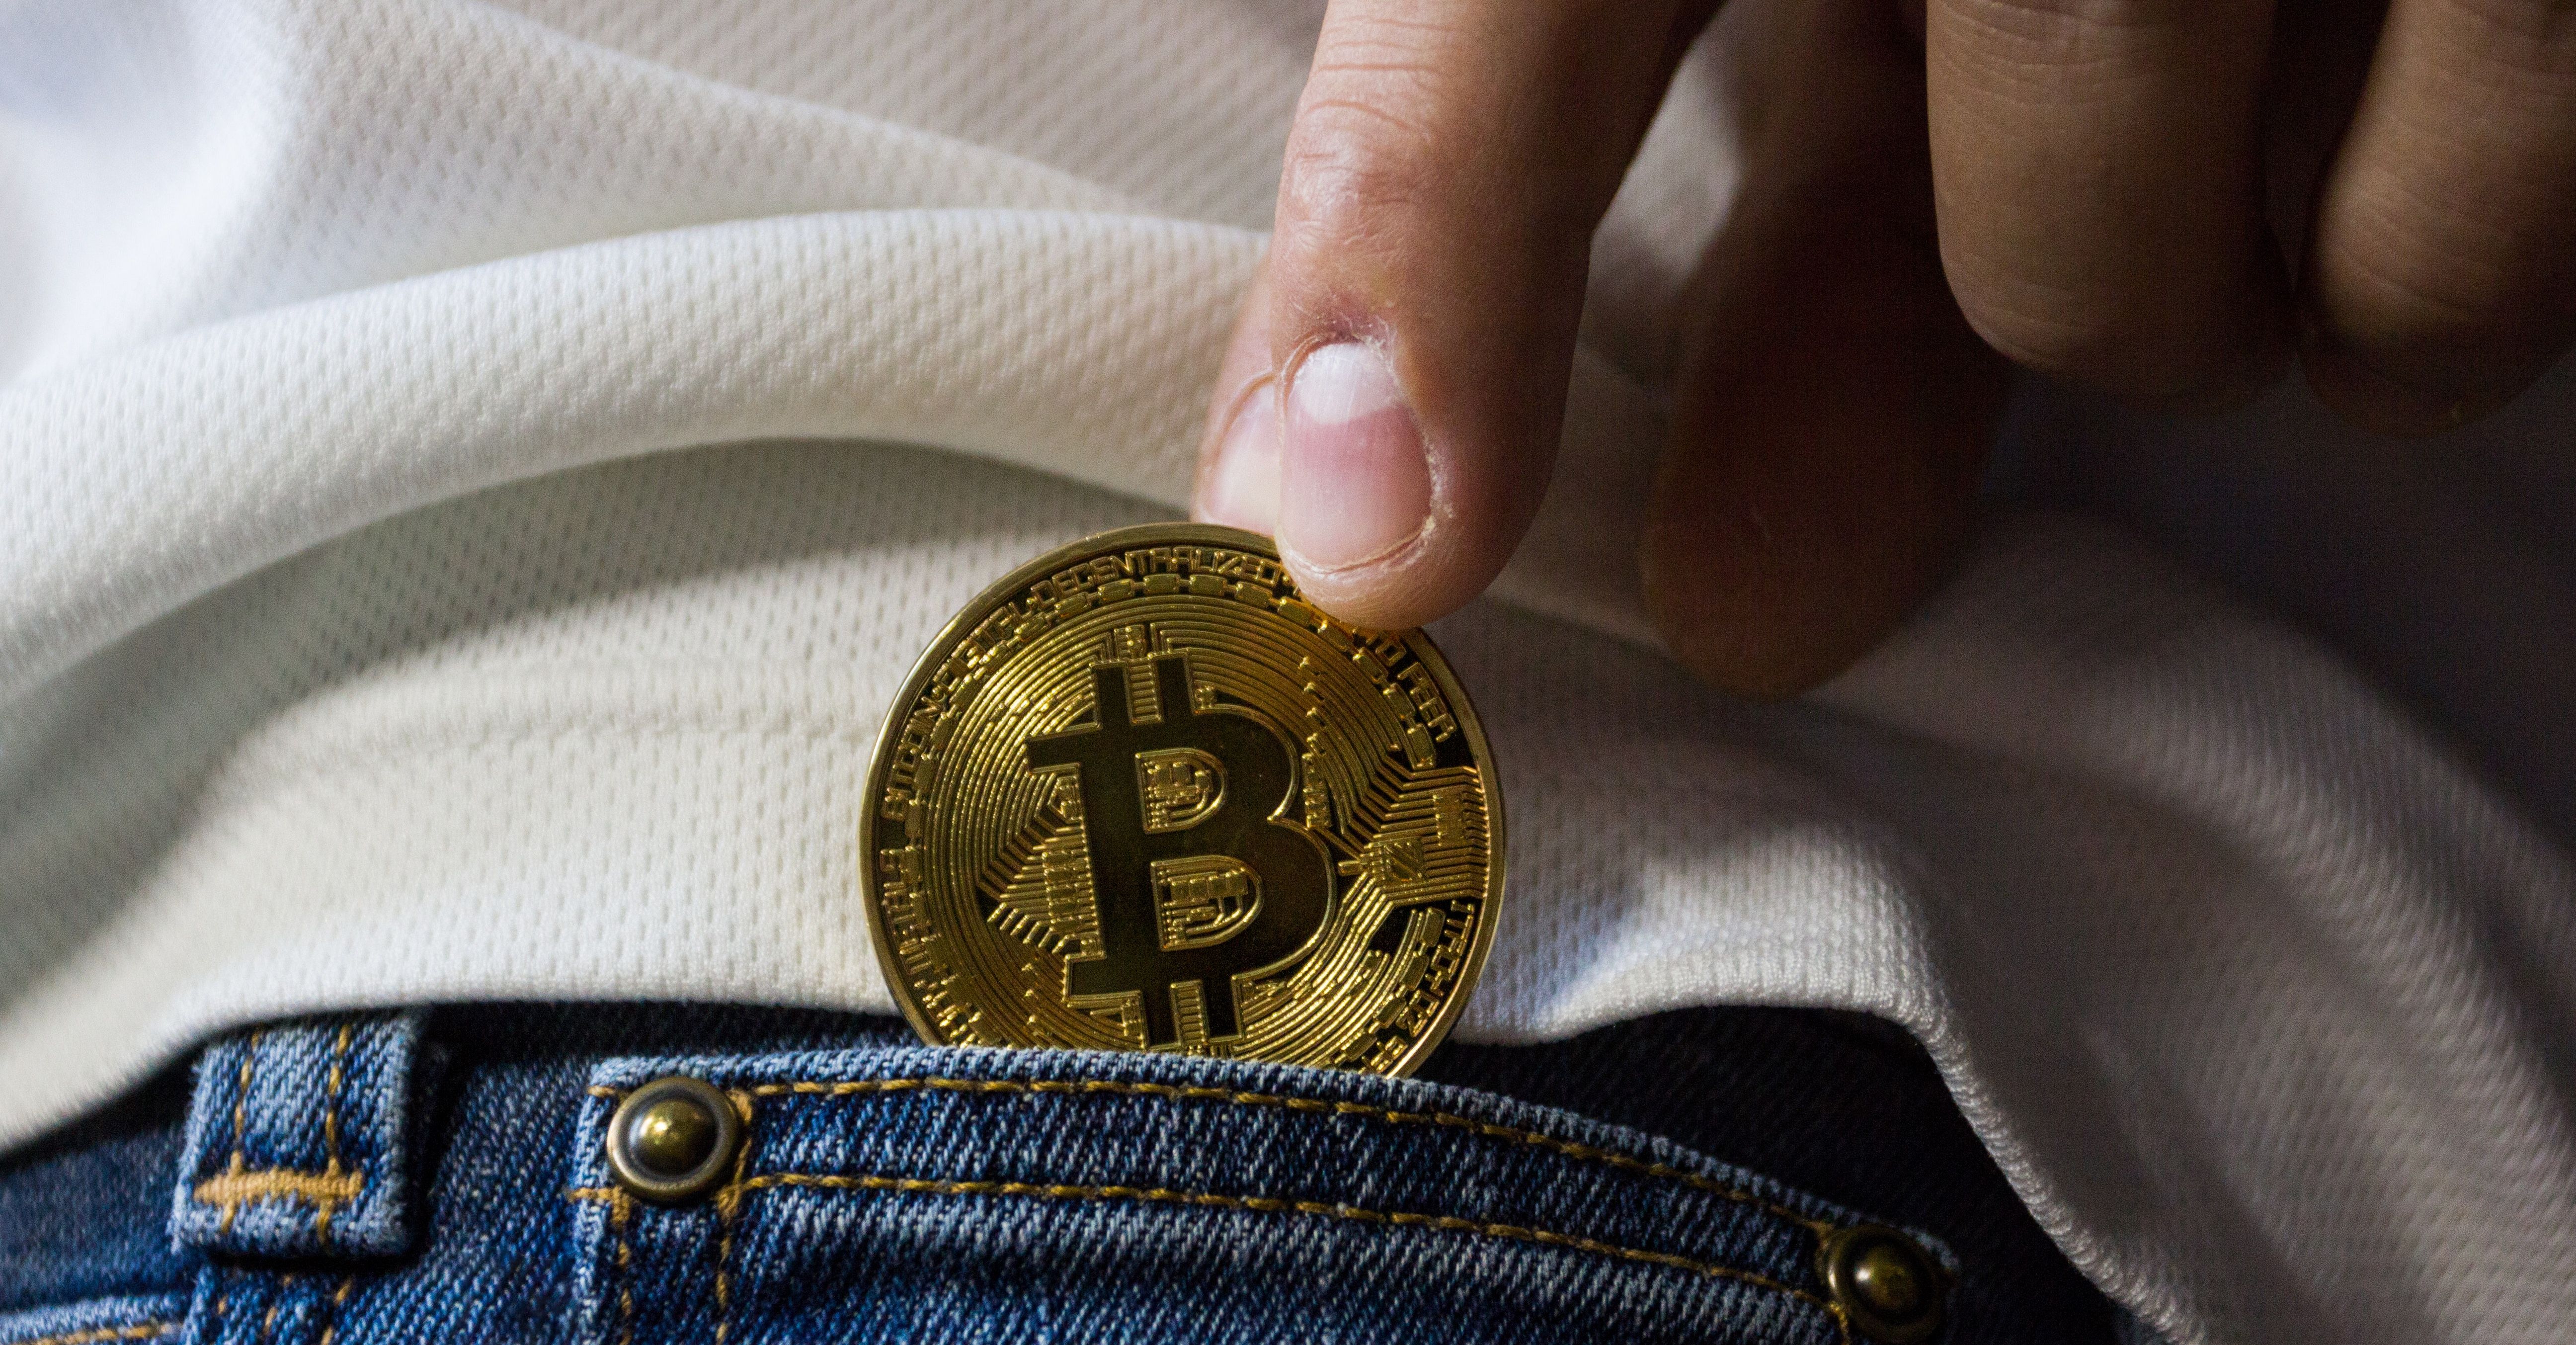 bitcoin being placed in pocket